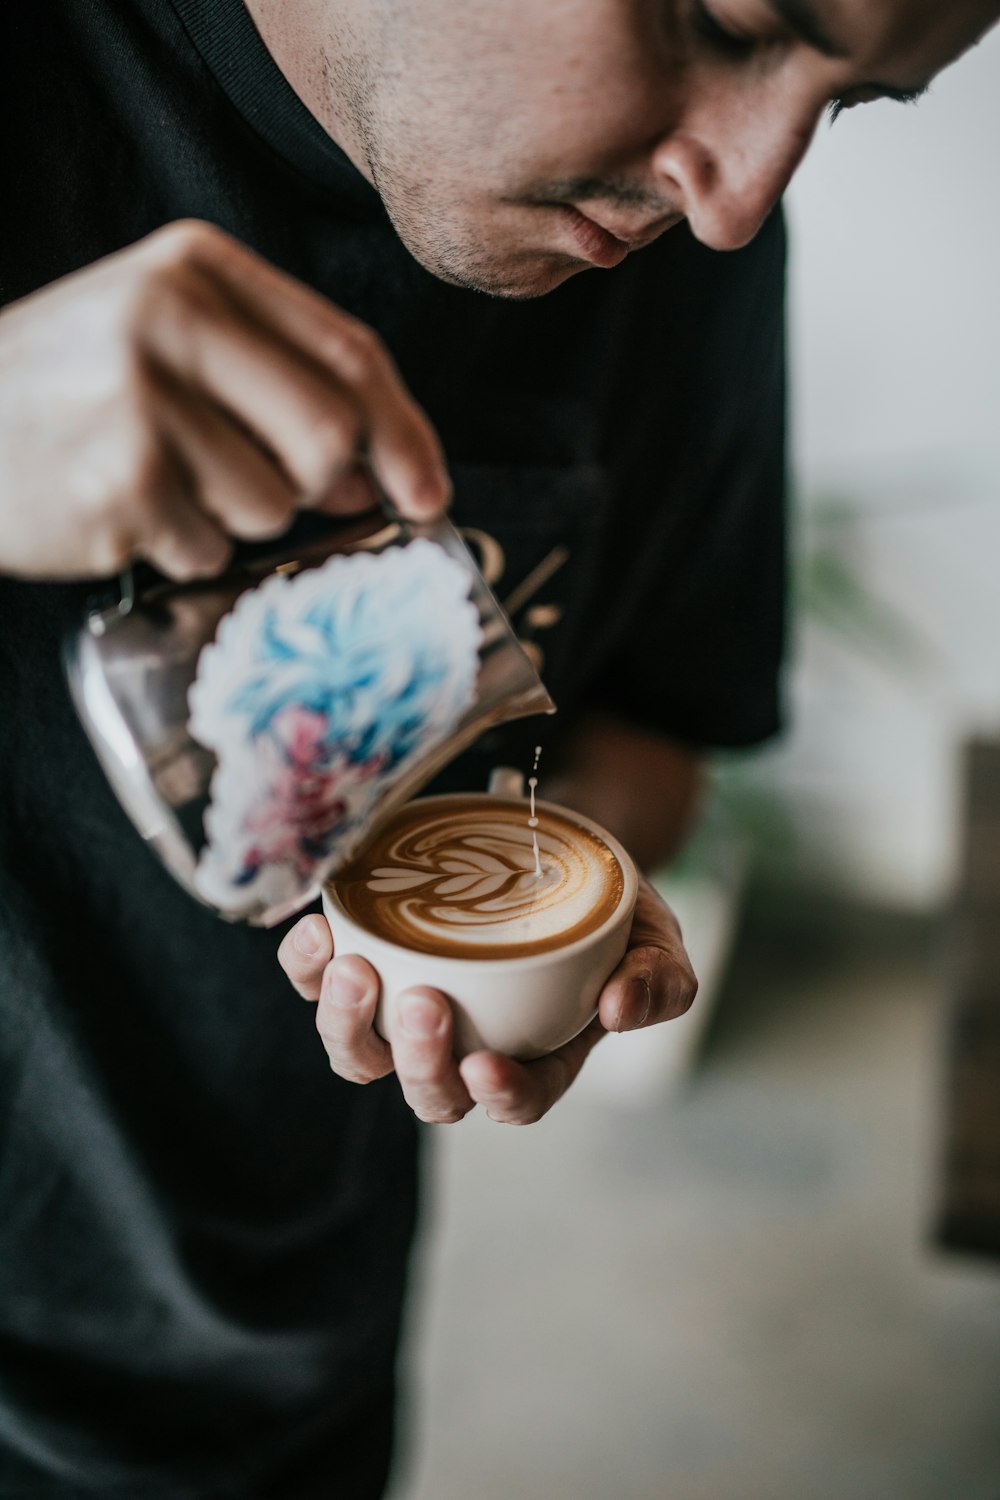 person holding mug and making cappuccino